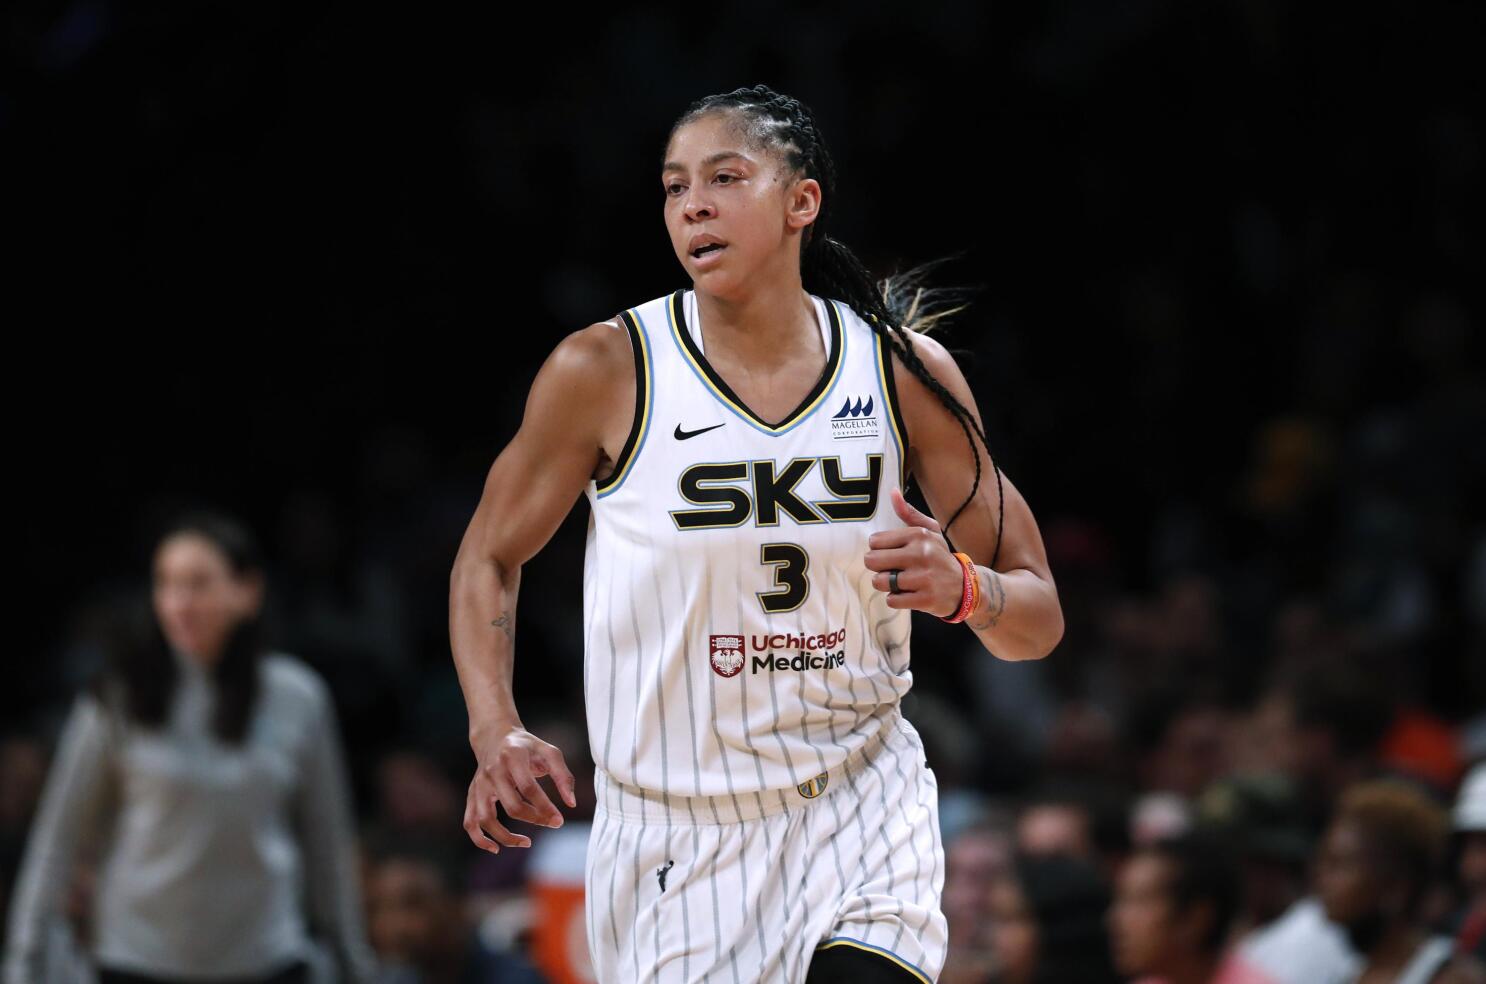 Candace Parker to meet with Aces after speaking to Sky, Sparks